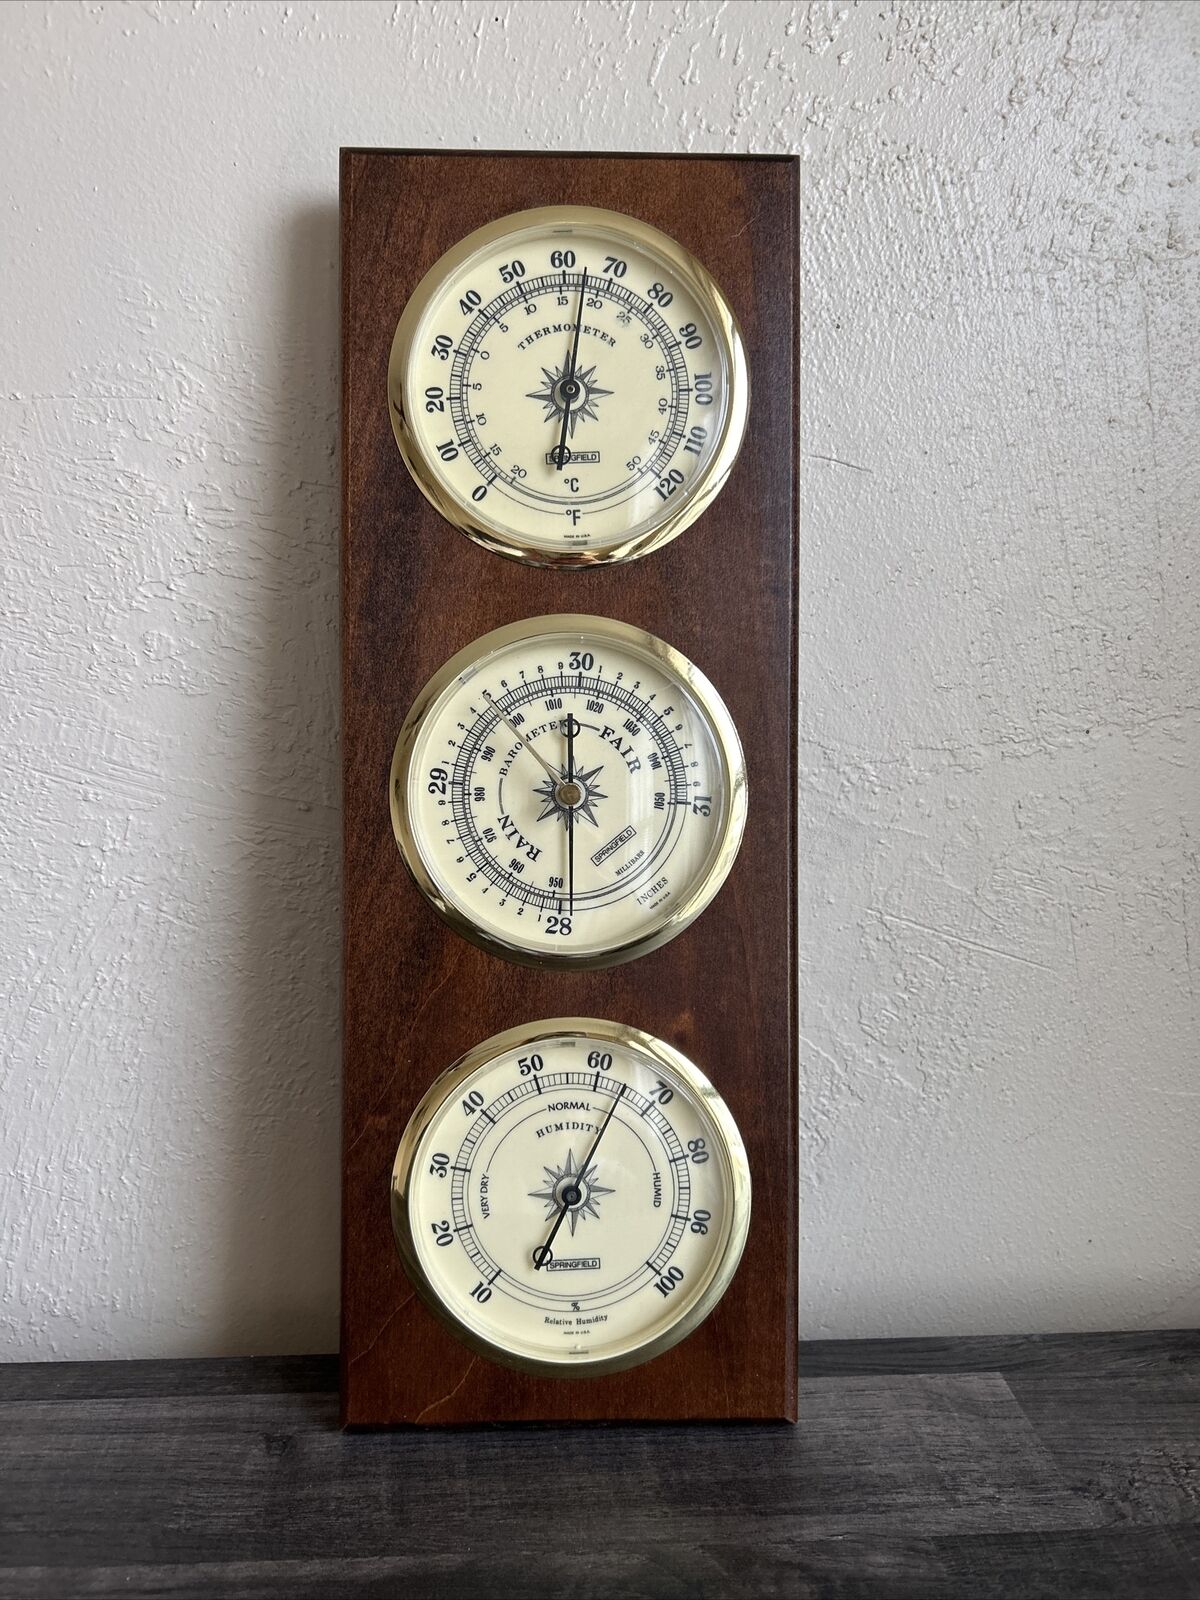 SPRINGFIELD Weather Station Thermometer Humidity Barometer On Wood